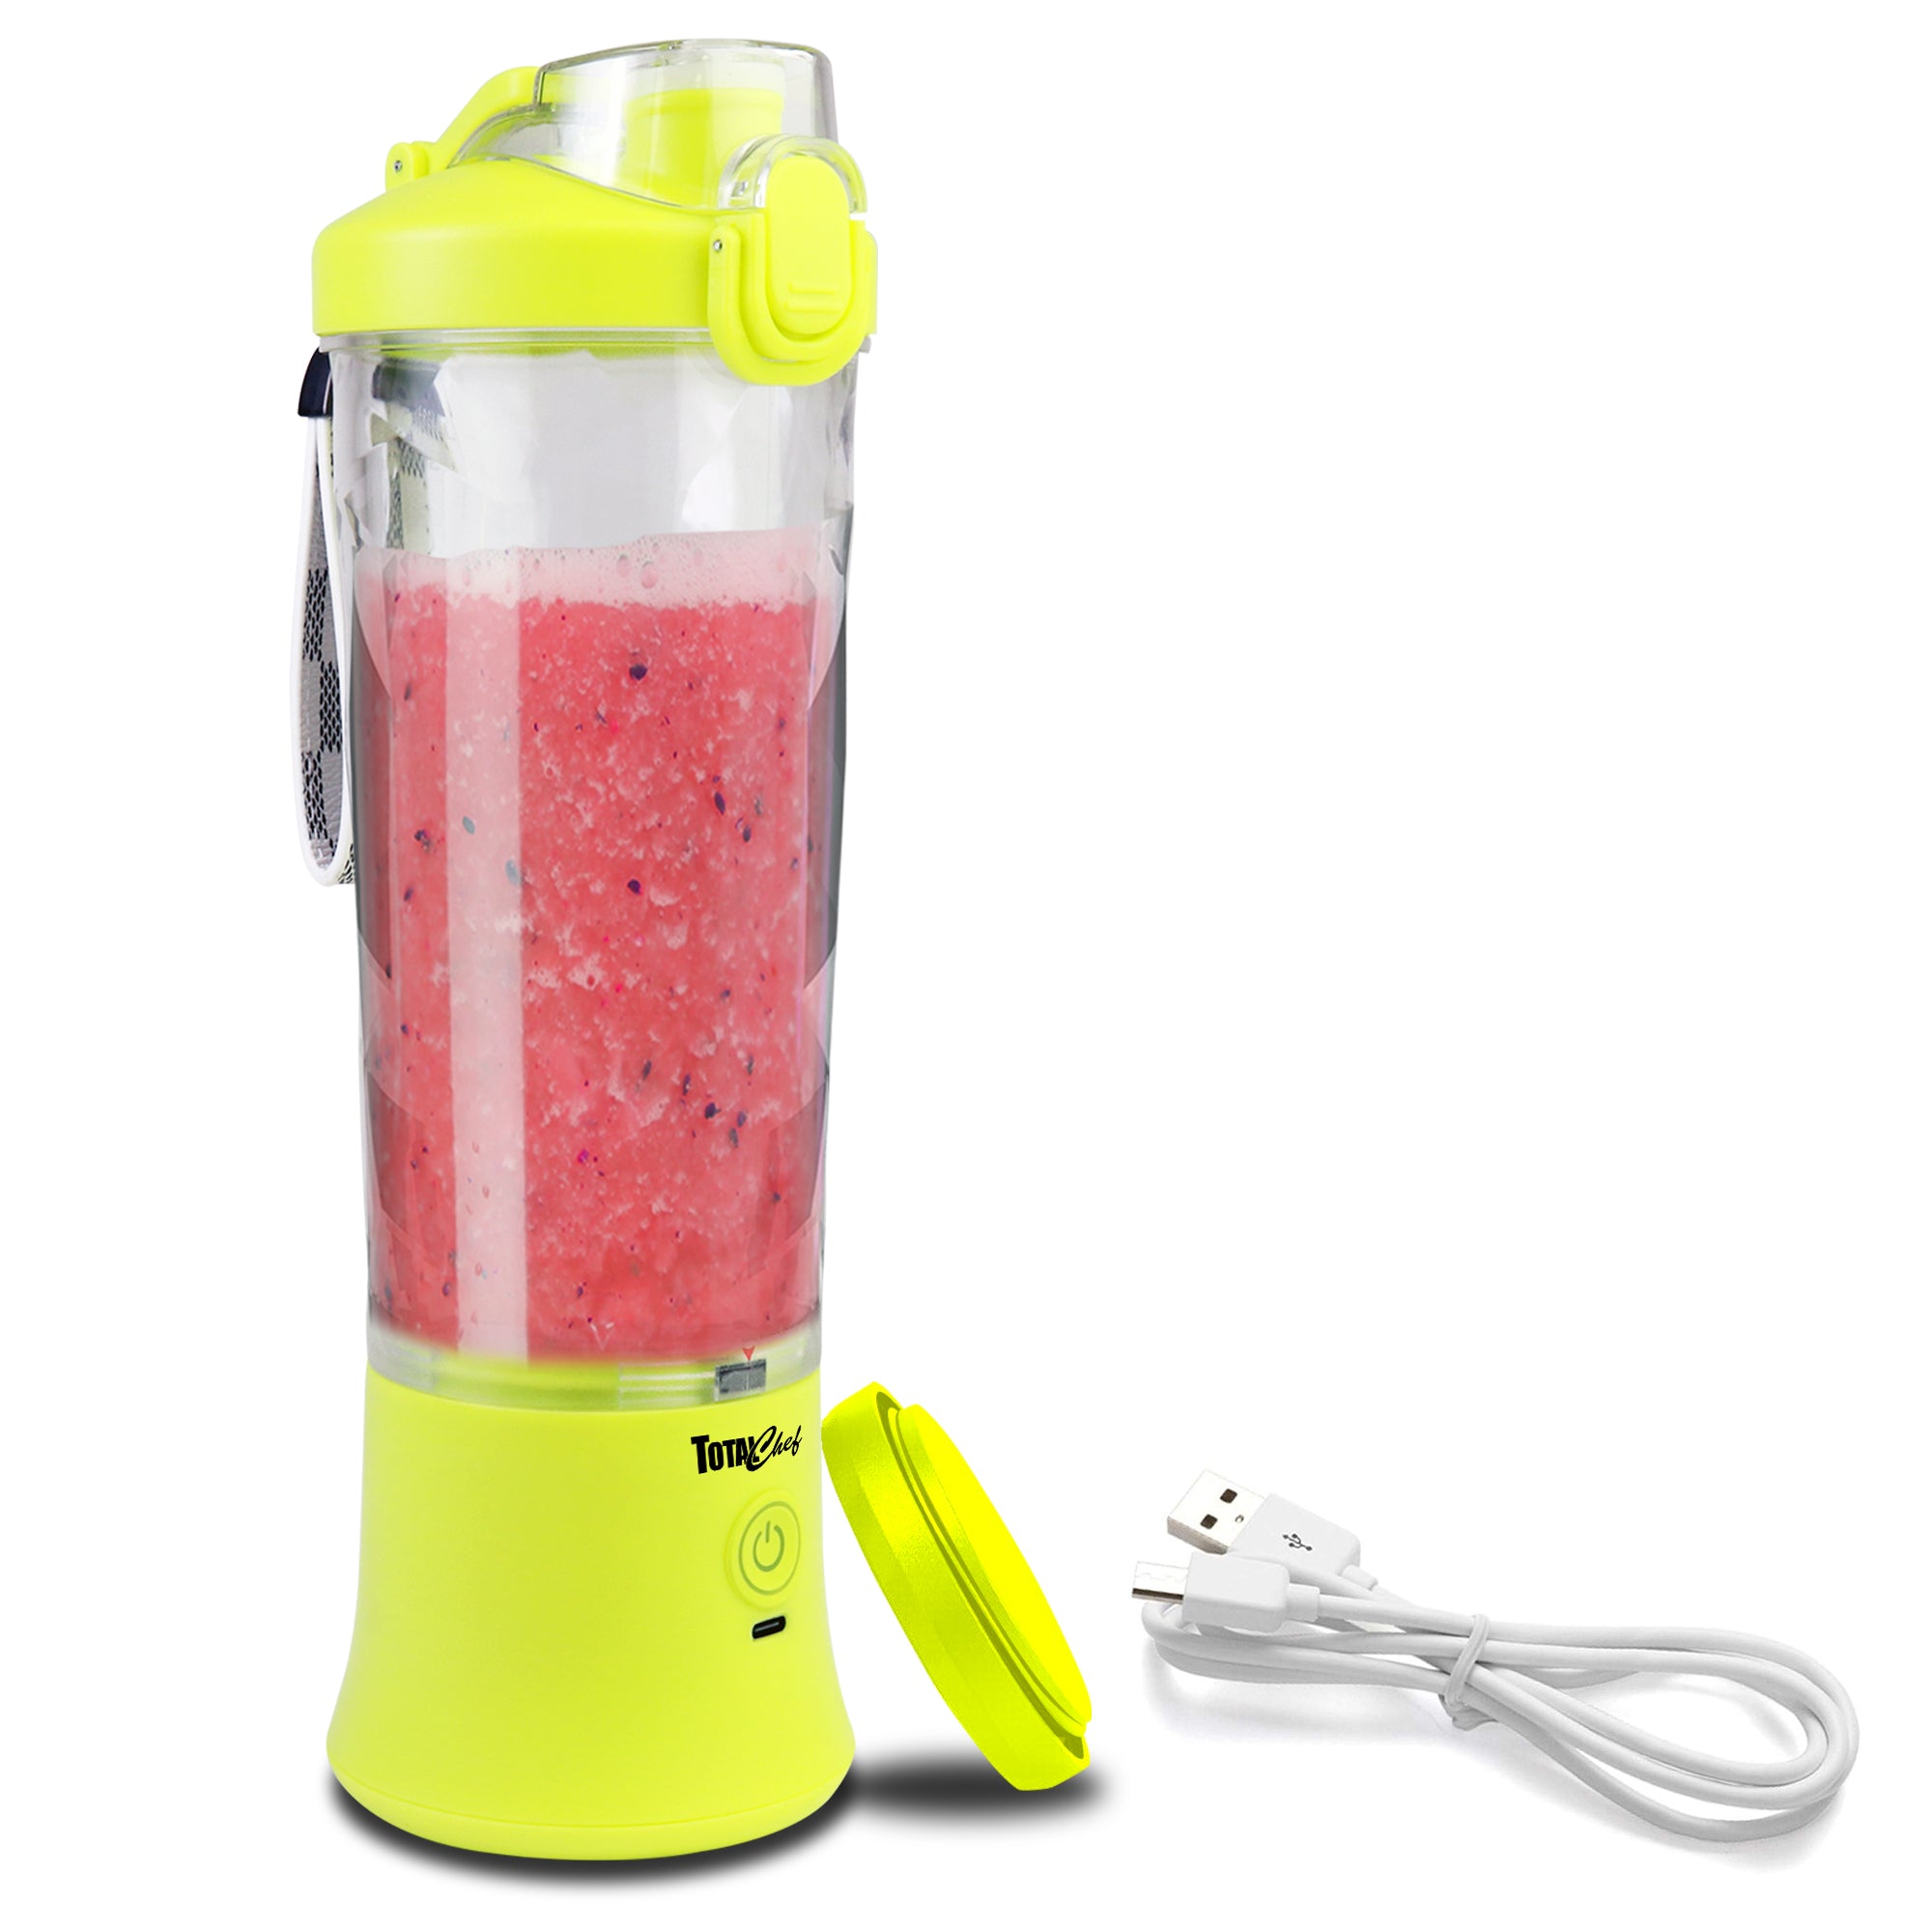 Top 5: Personal Travel Blender  Portable Blender for Shakes and